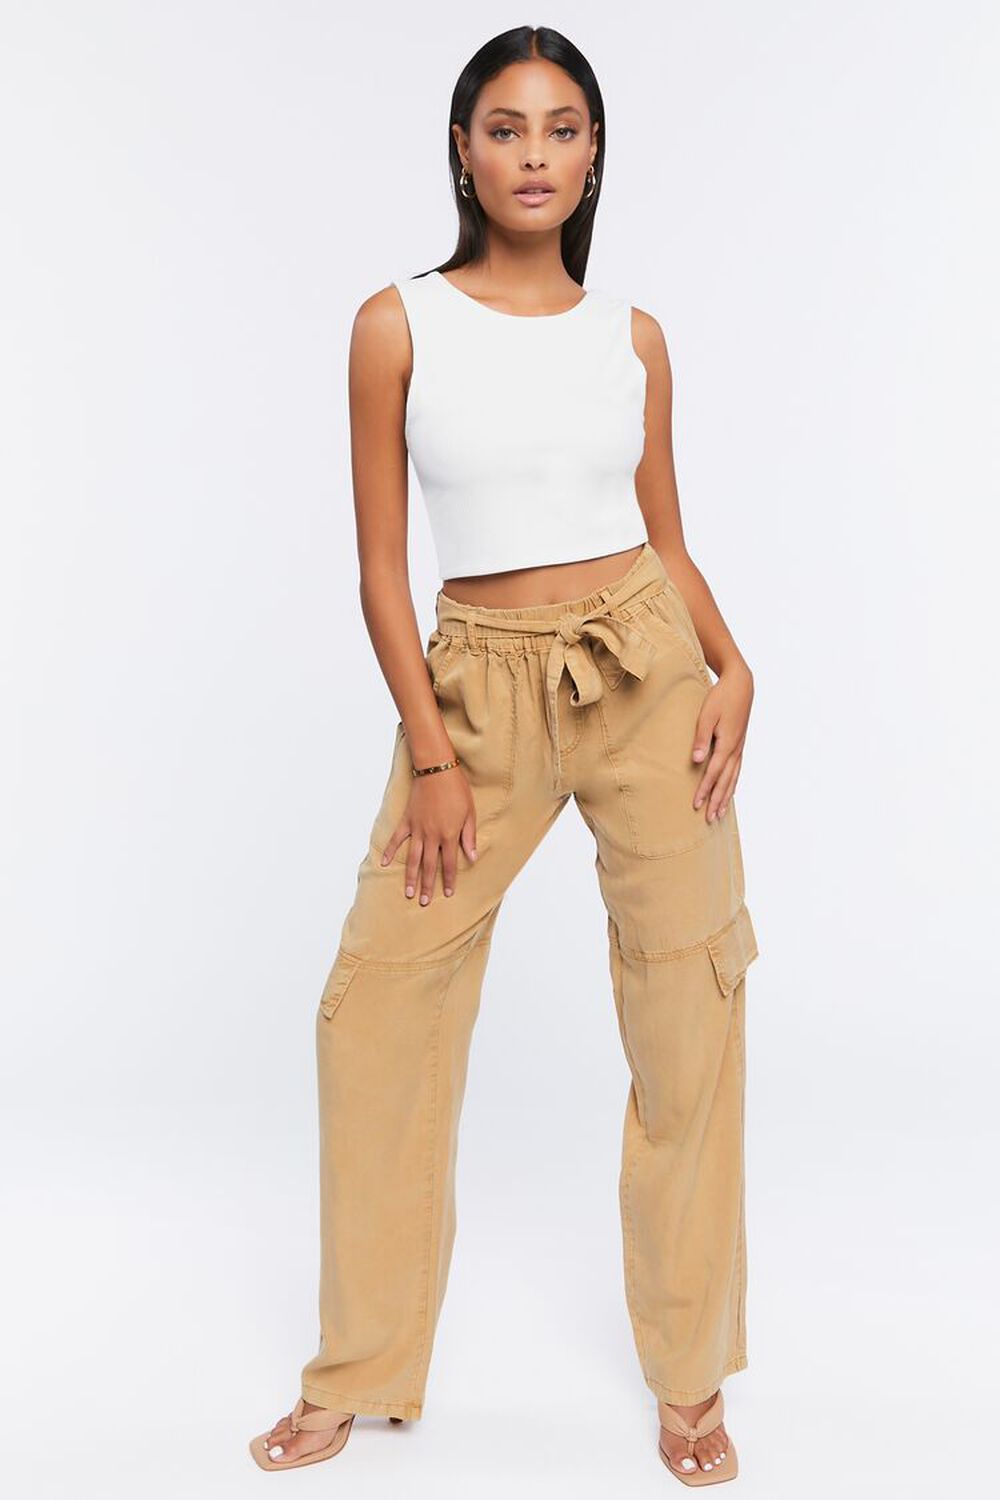 COFFEE Belted Twill Cargo Pants, image 1